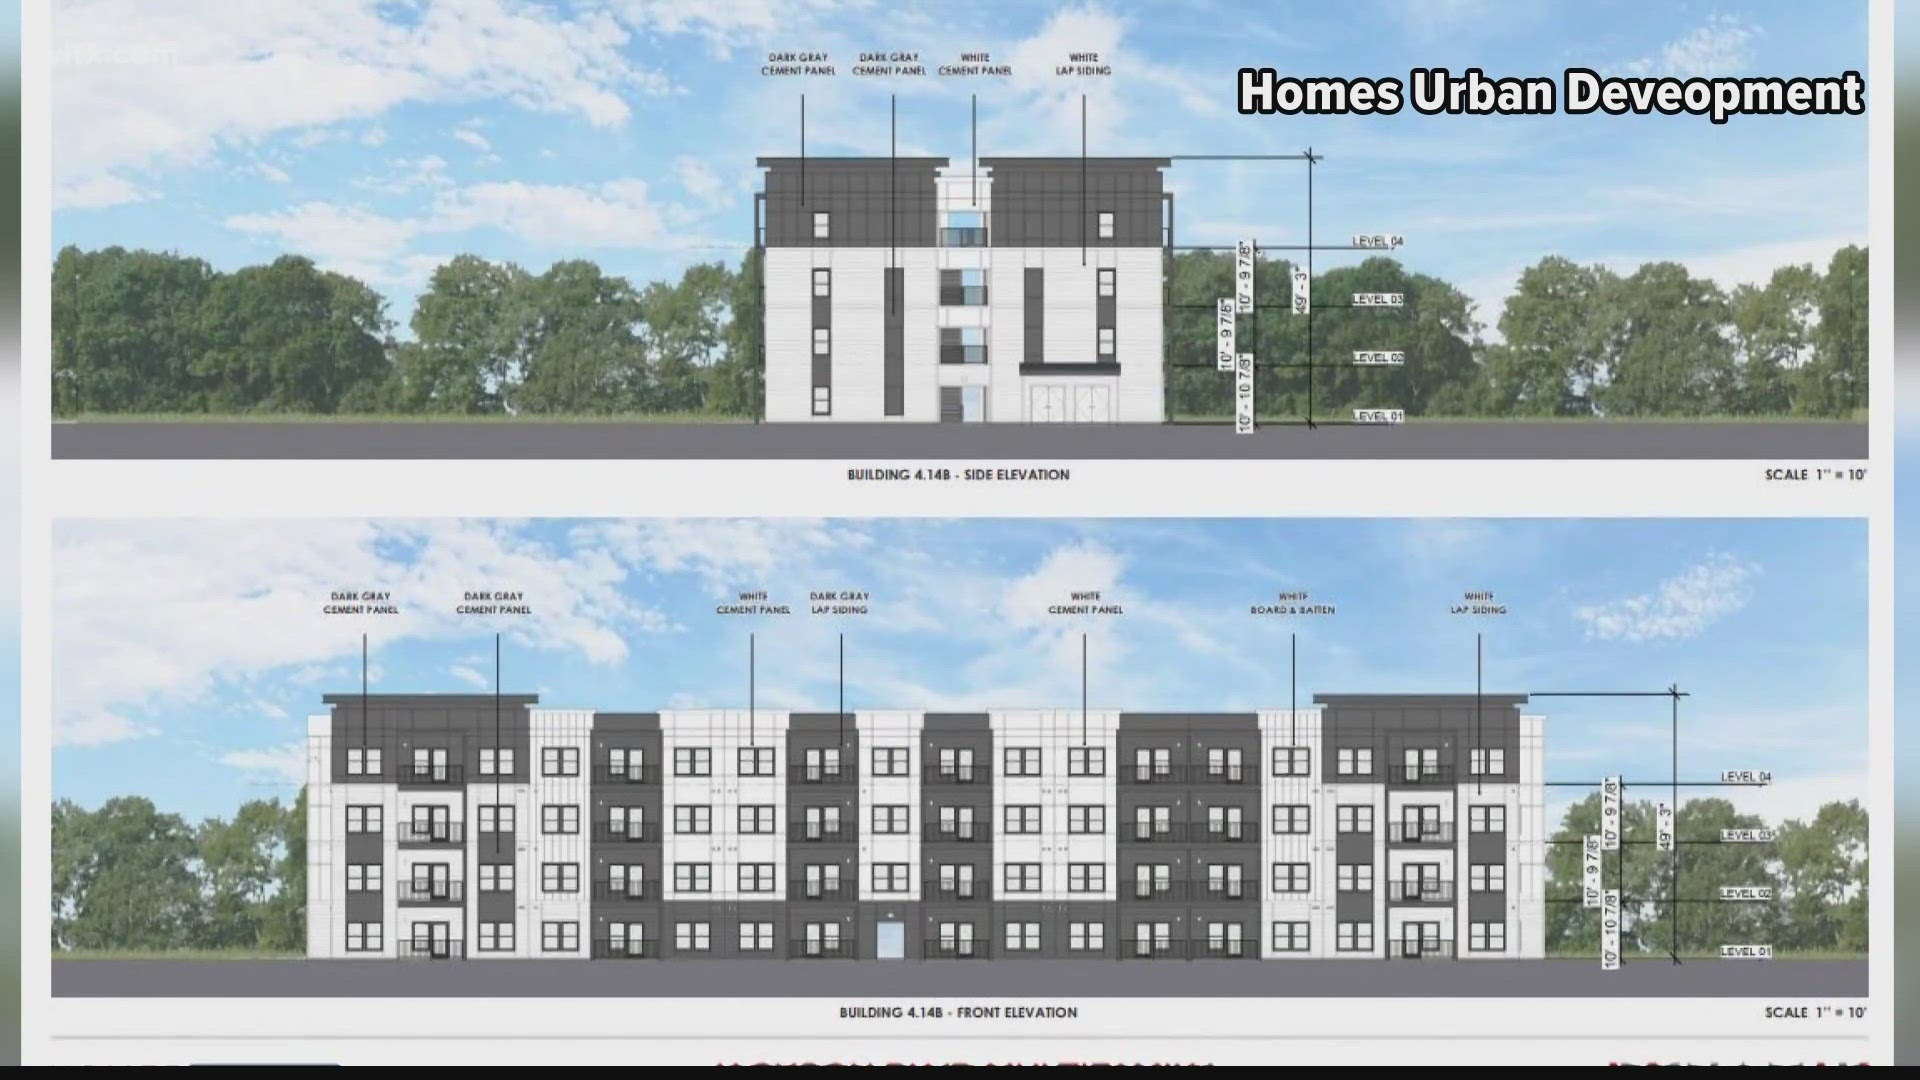 The 280 unit complex has received mixed reviews from Columbia residents.